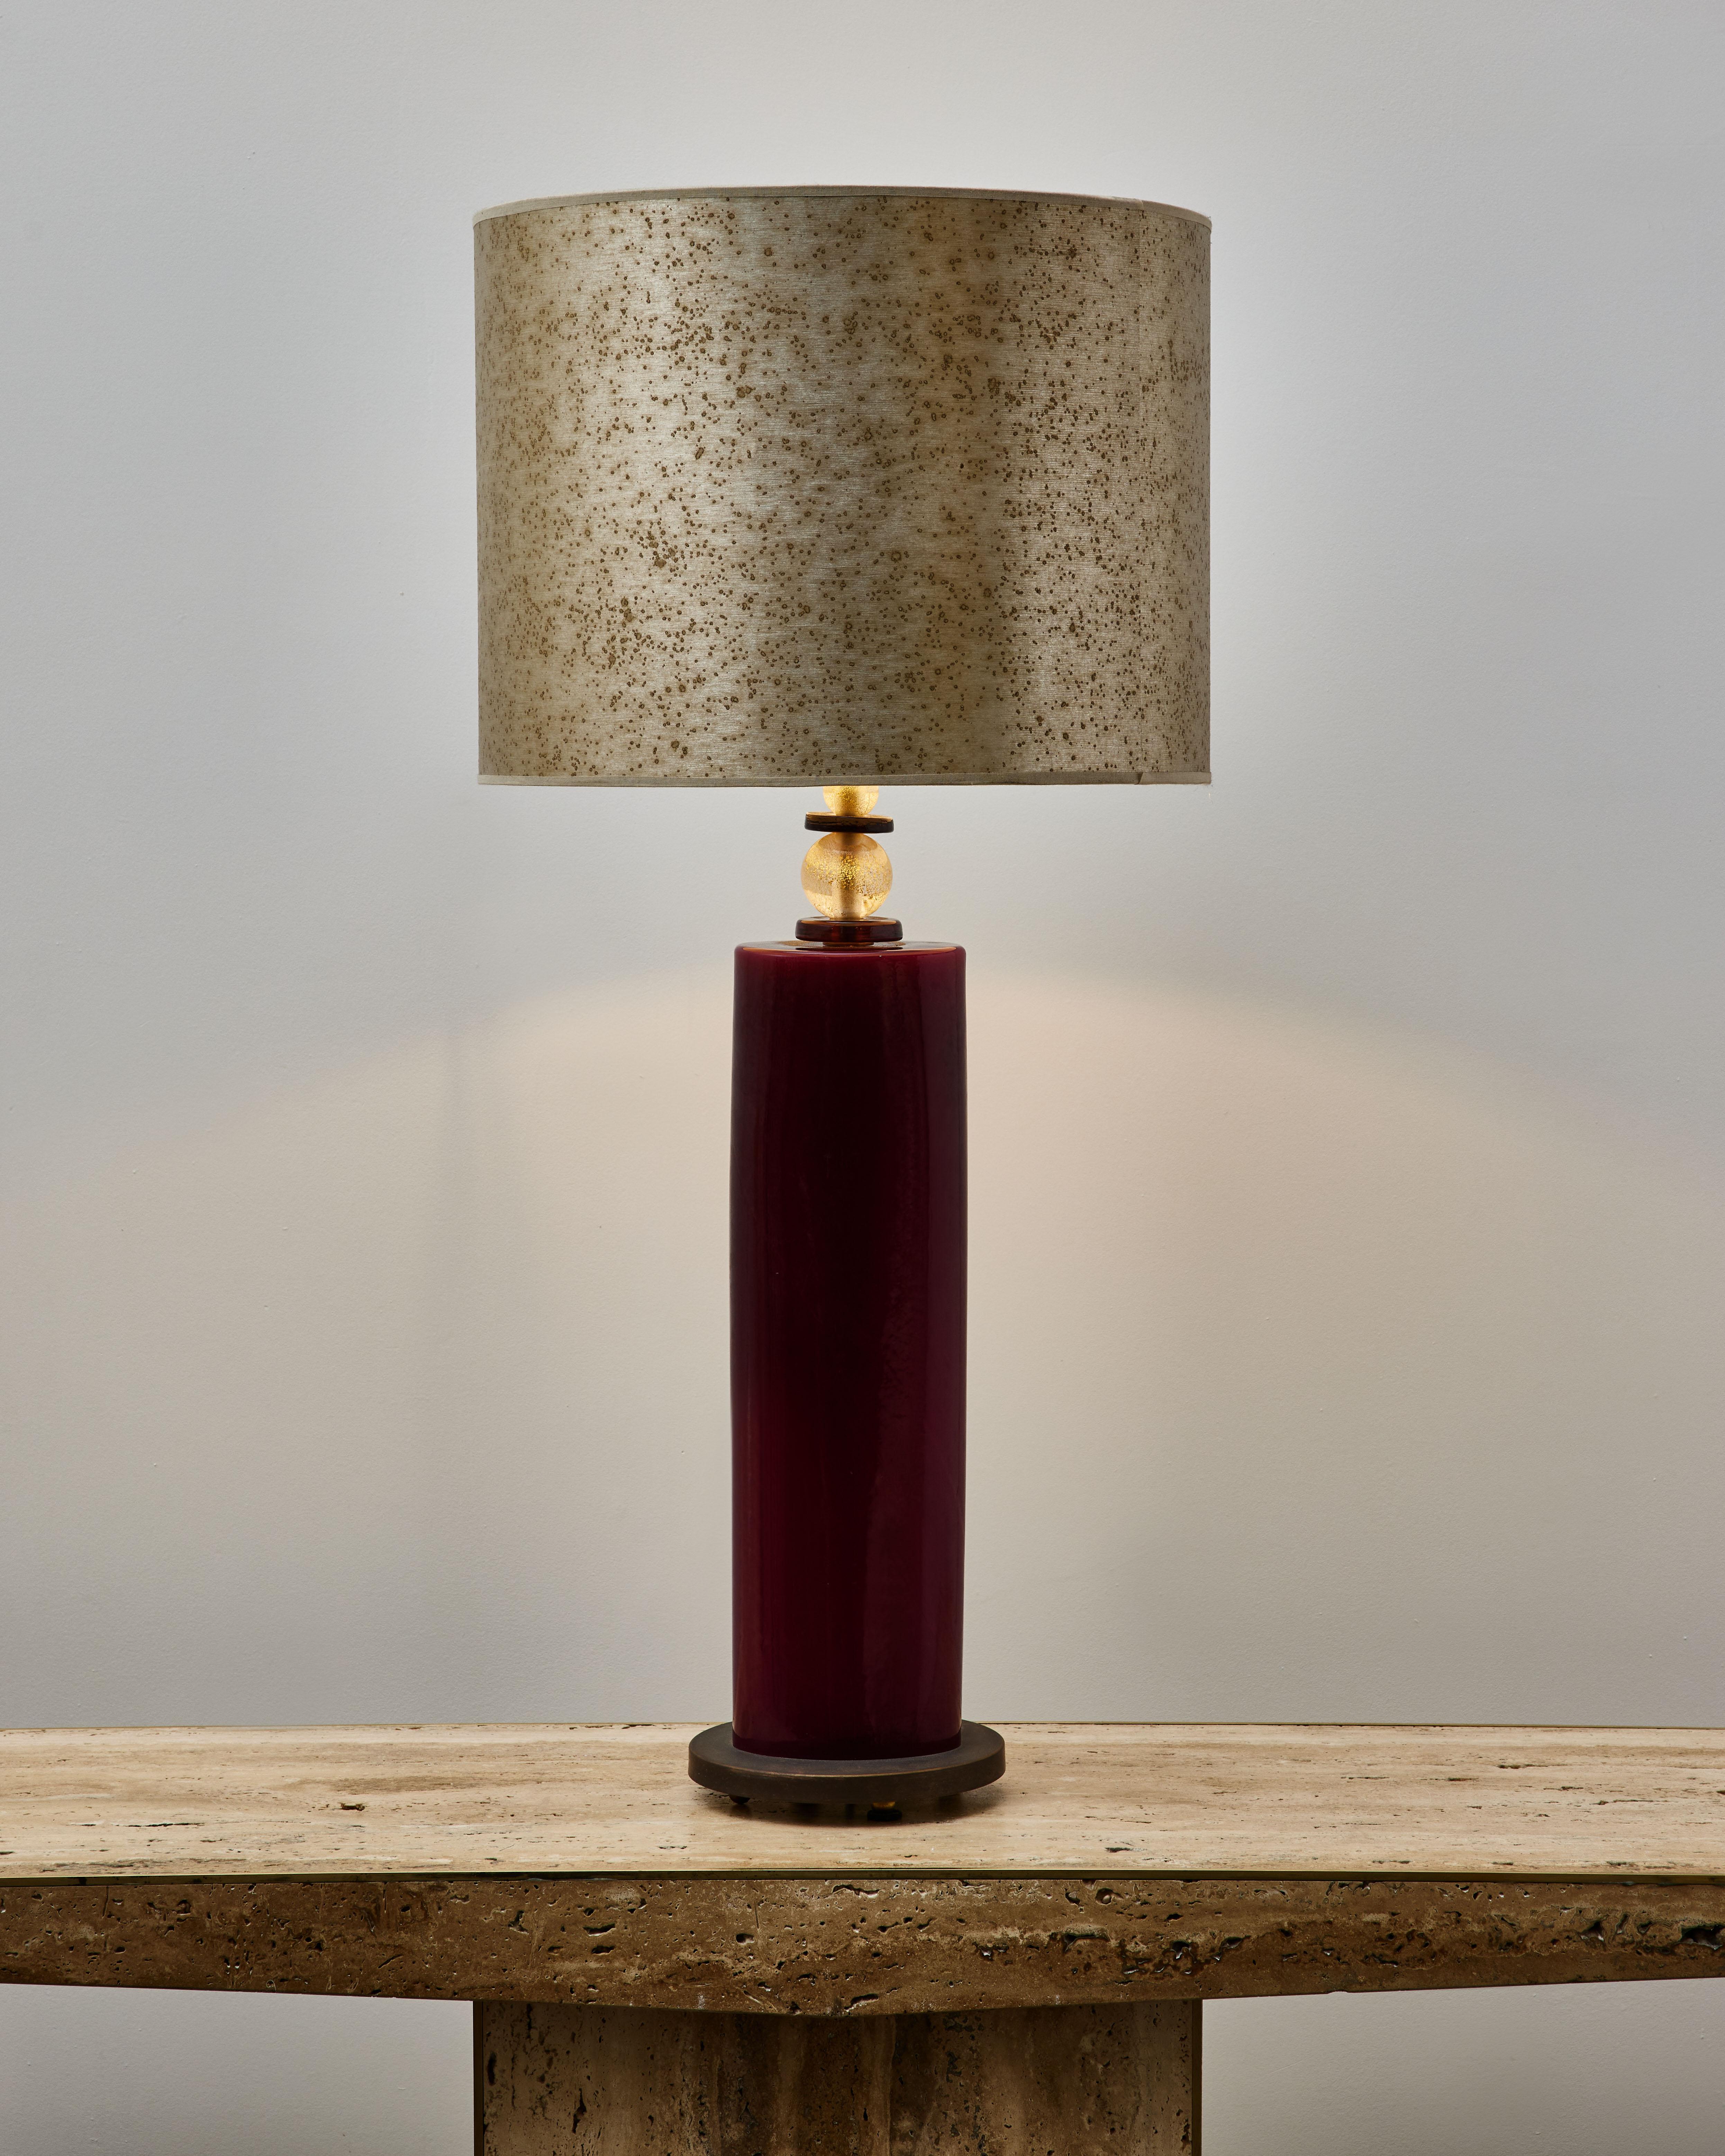 Unique vintage table lamp in Murano glass.
Entirely restored and rewired.
Italy, 1980s.

Dimensions and price without shade.